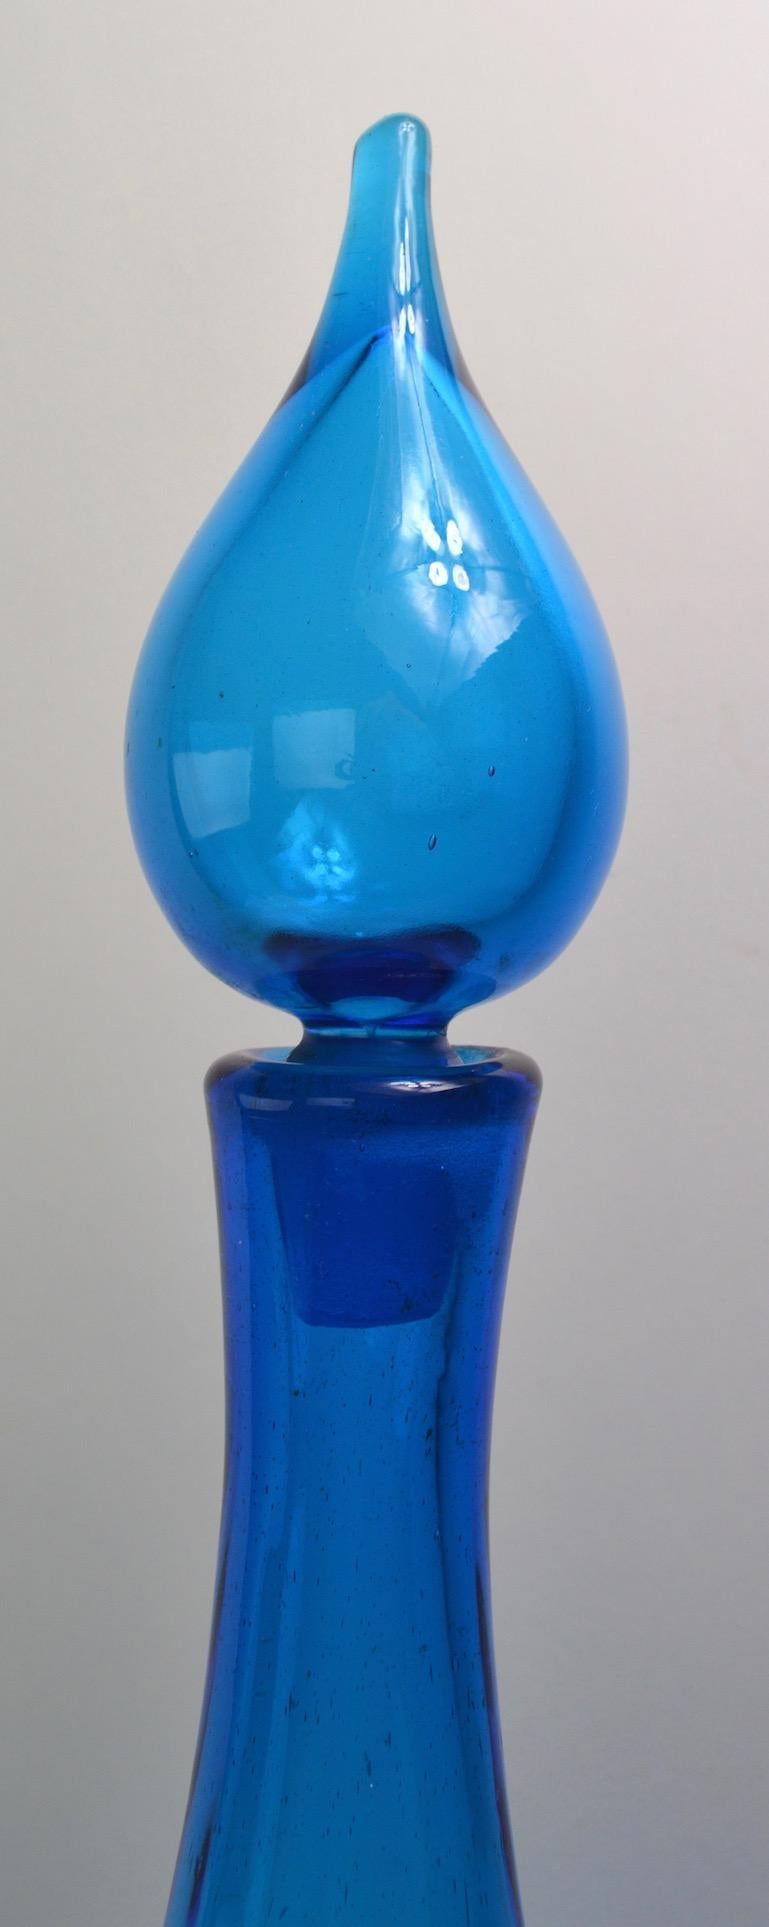 Large blue stoppered bottle by Blenko, in perfect condition.